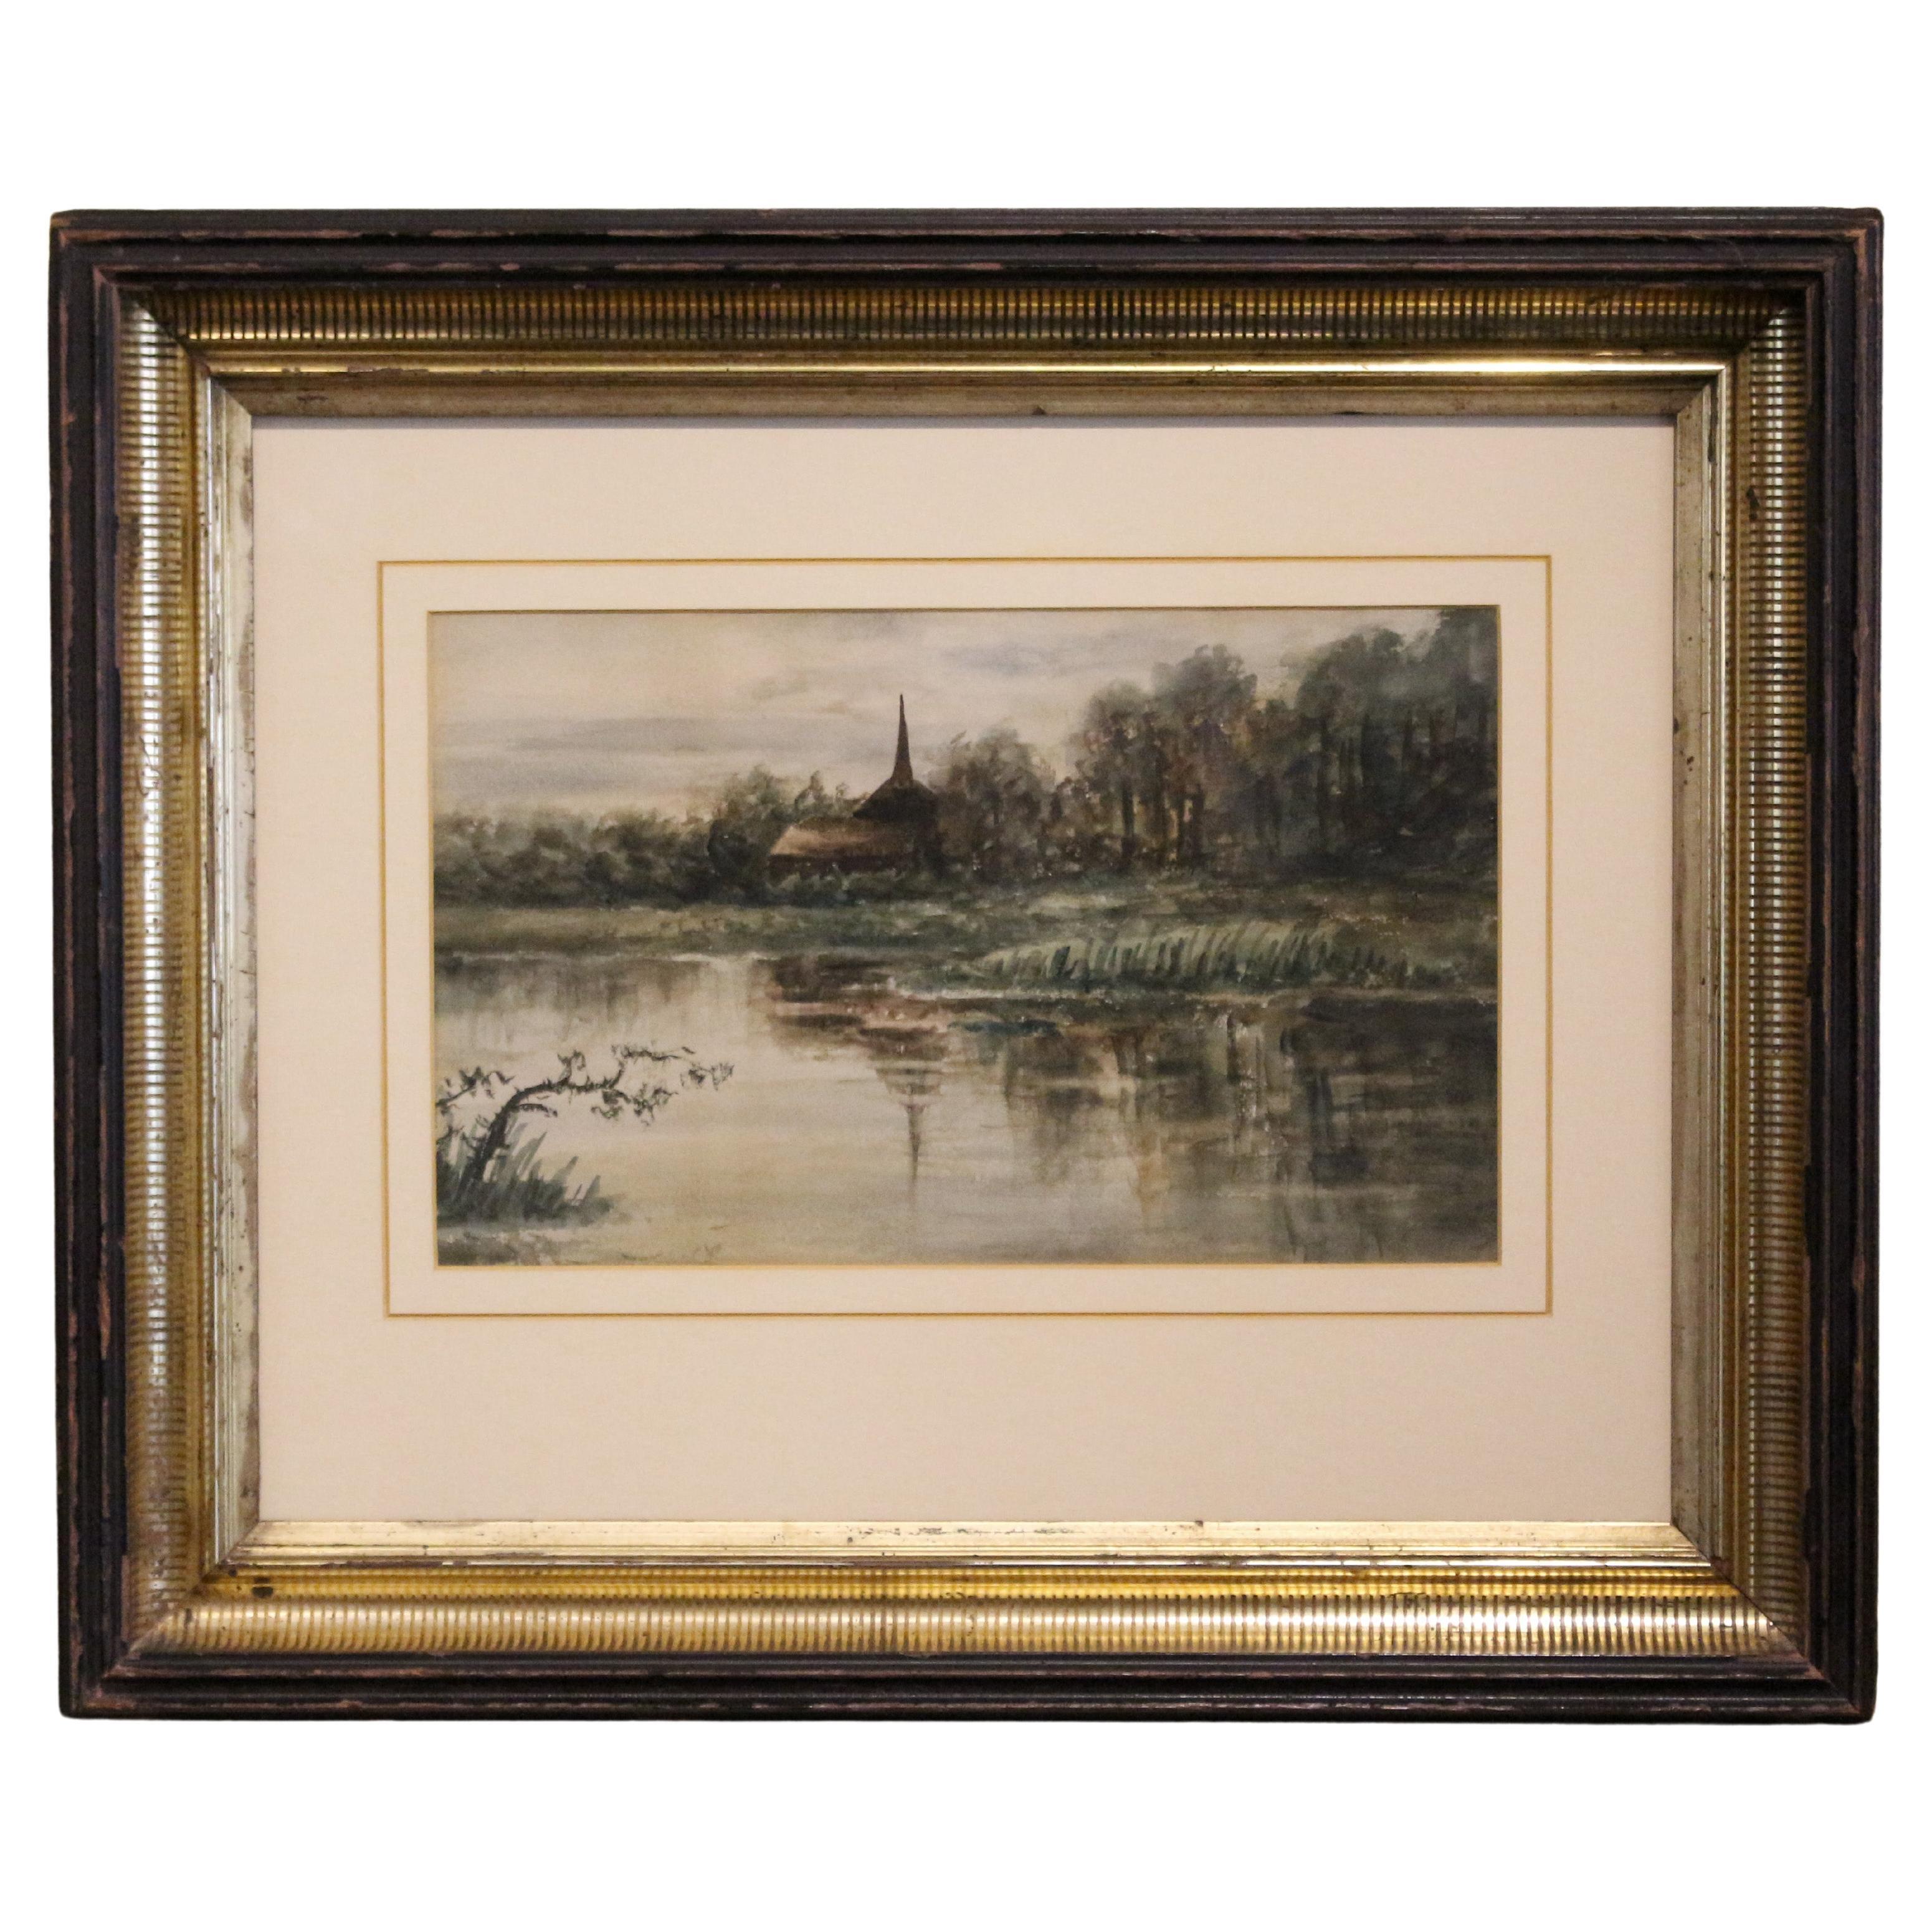 Likely Late 19th Century European Water Scene Watercolor